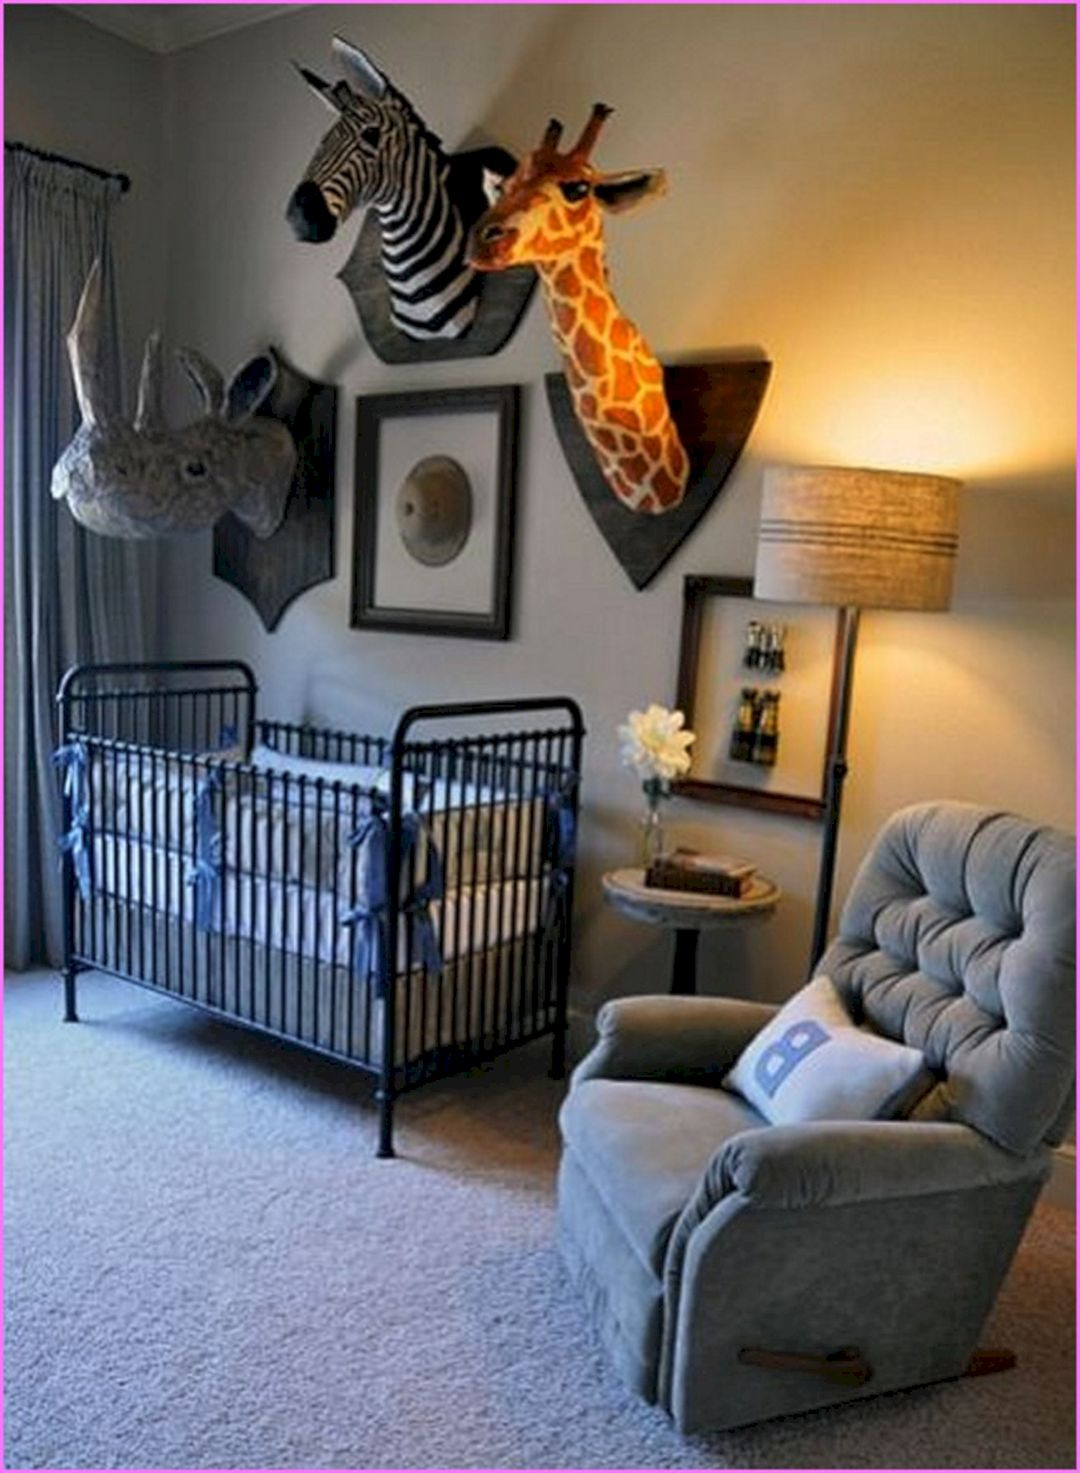 Wall Decoration For Baby Room
 Safari Baby Room Wall Decor Ideas Safari Baby Room Wall